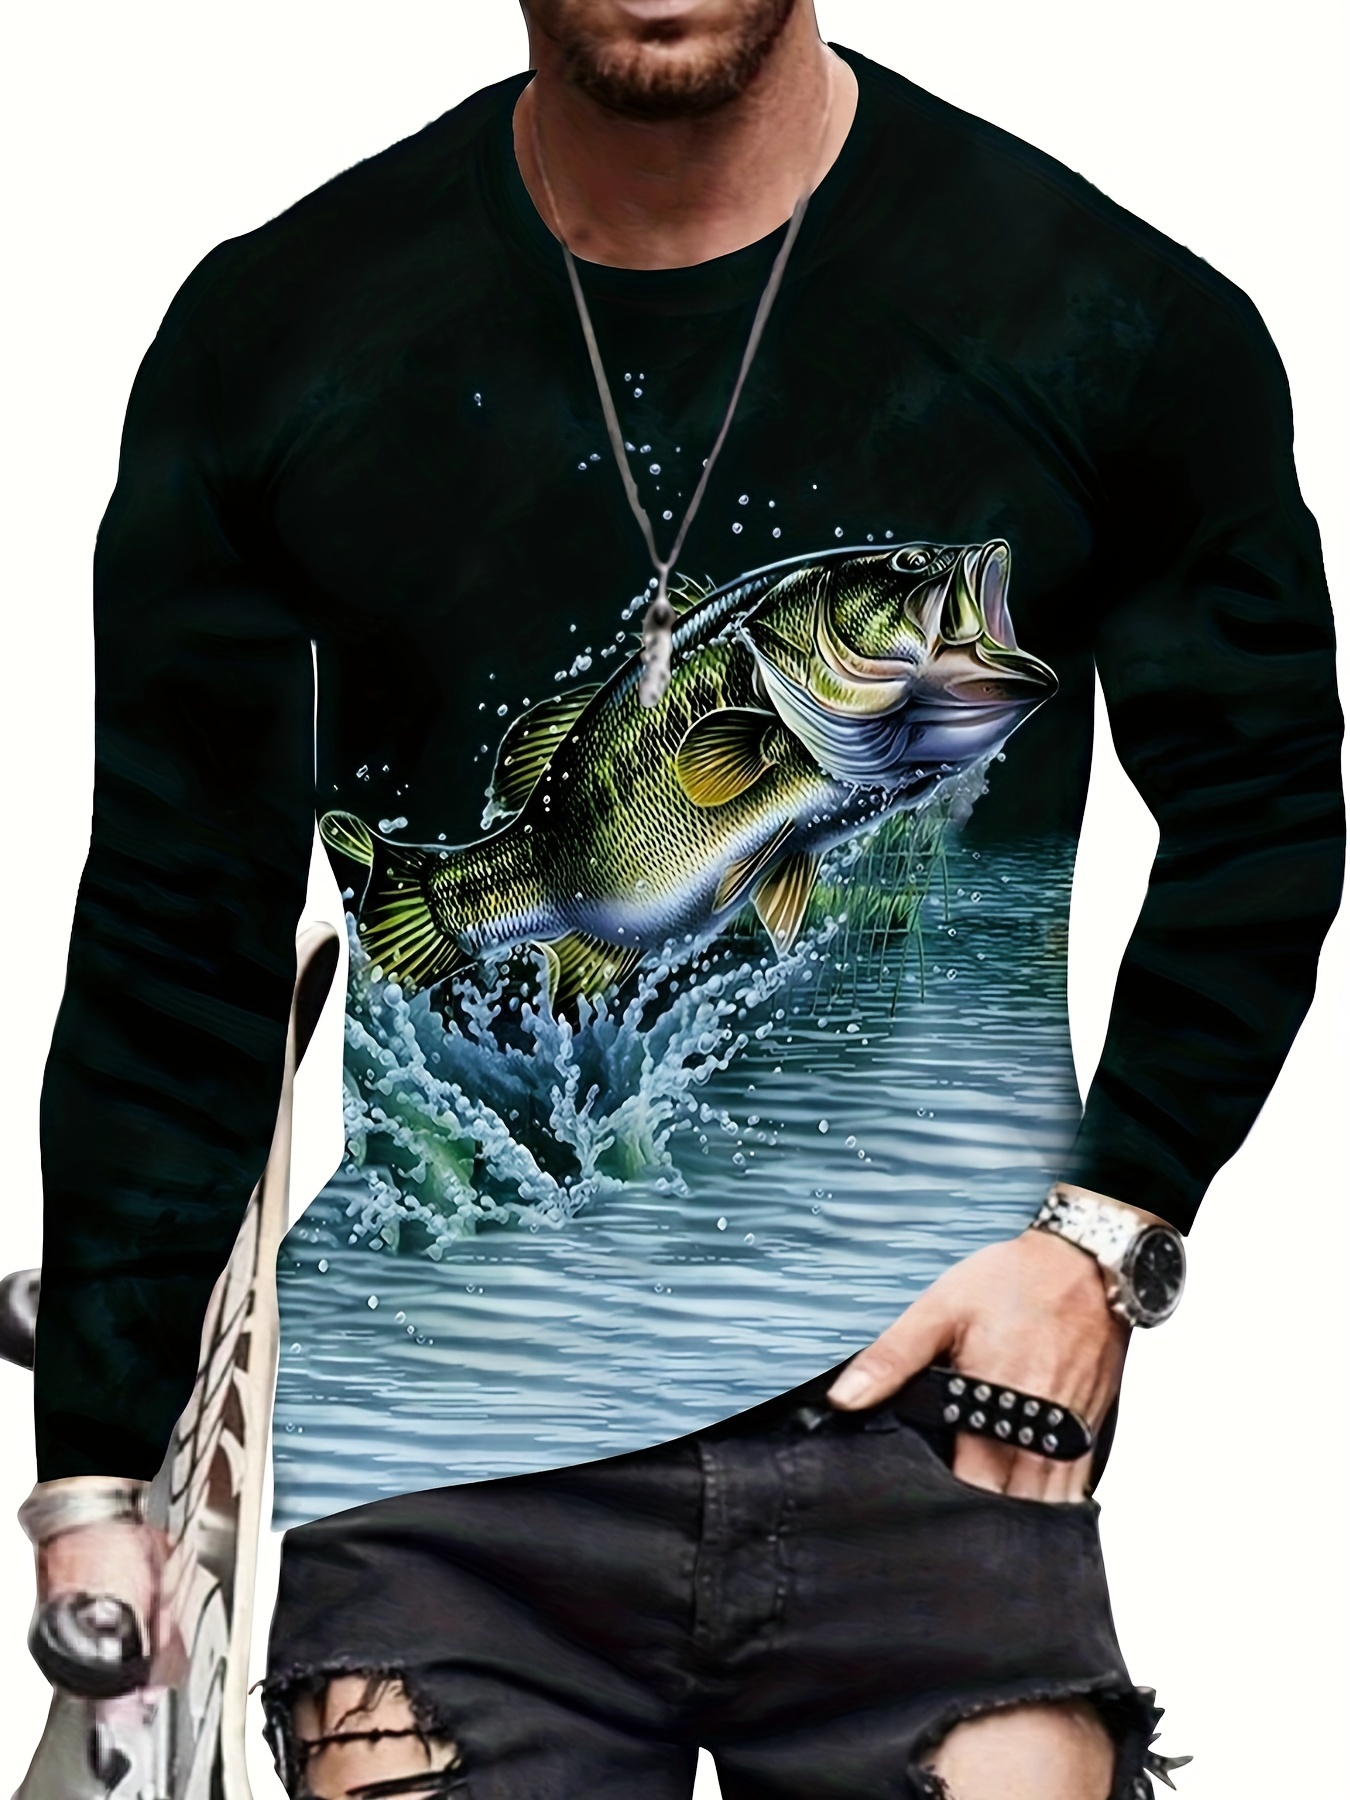 Print Crew Neck Long Sleeve Tee, T Shirt, Men's Slight Stretch Vacation Stylish Fish Pattern Casual Breathable Top Street Outdoor Ties Shirt Tee